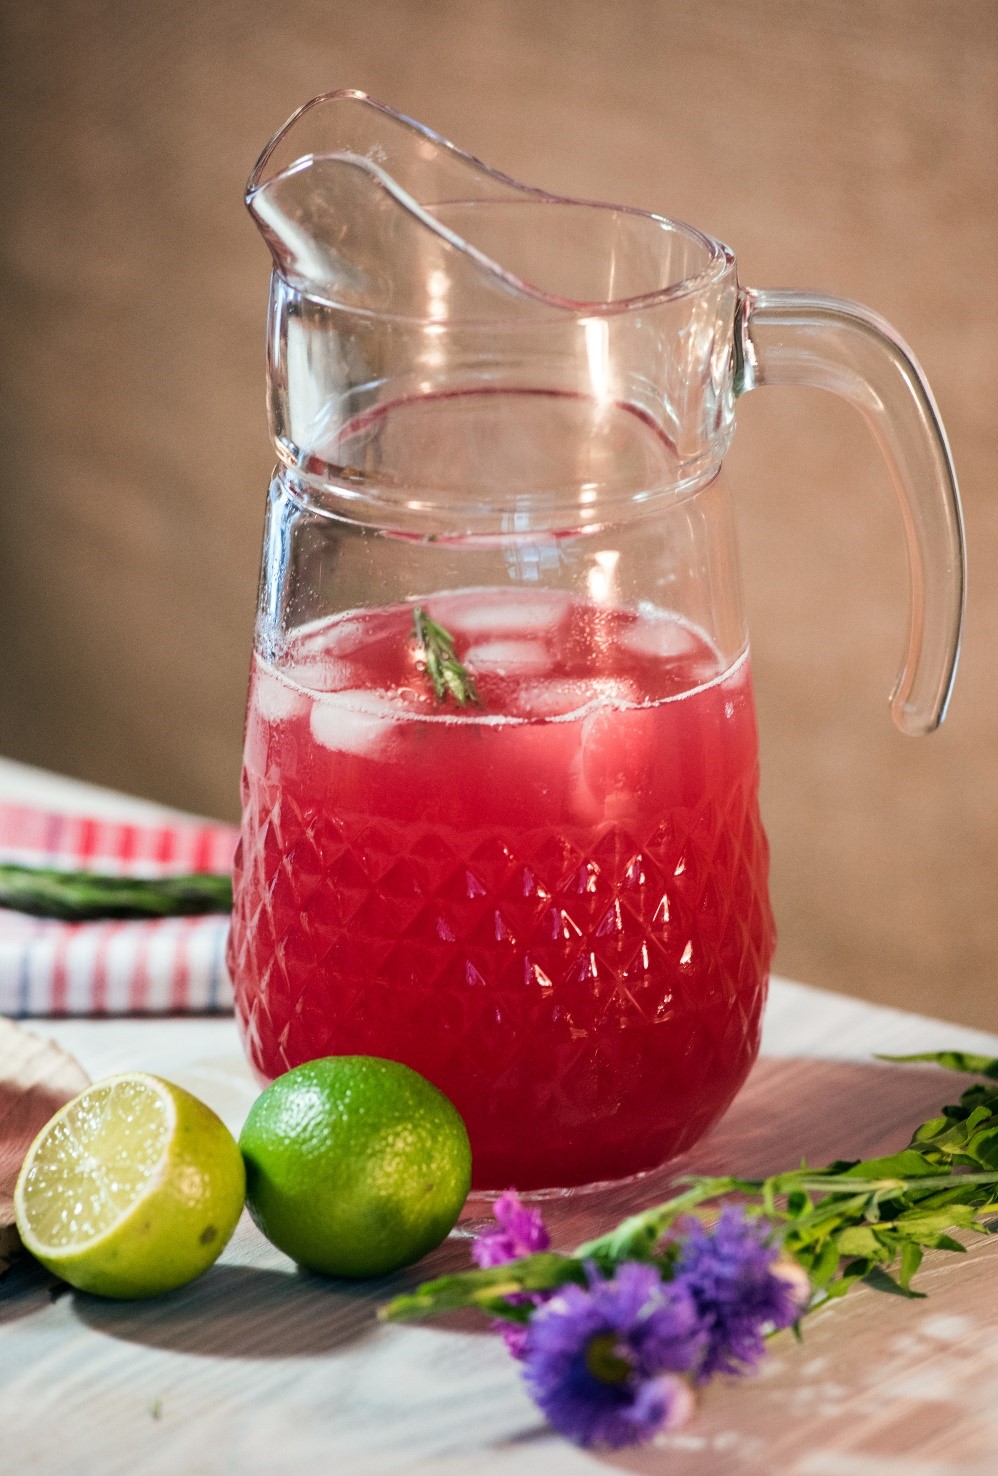 Fruit punch for your Summer picnics.